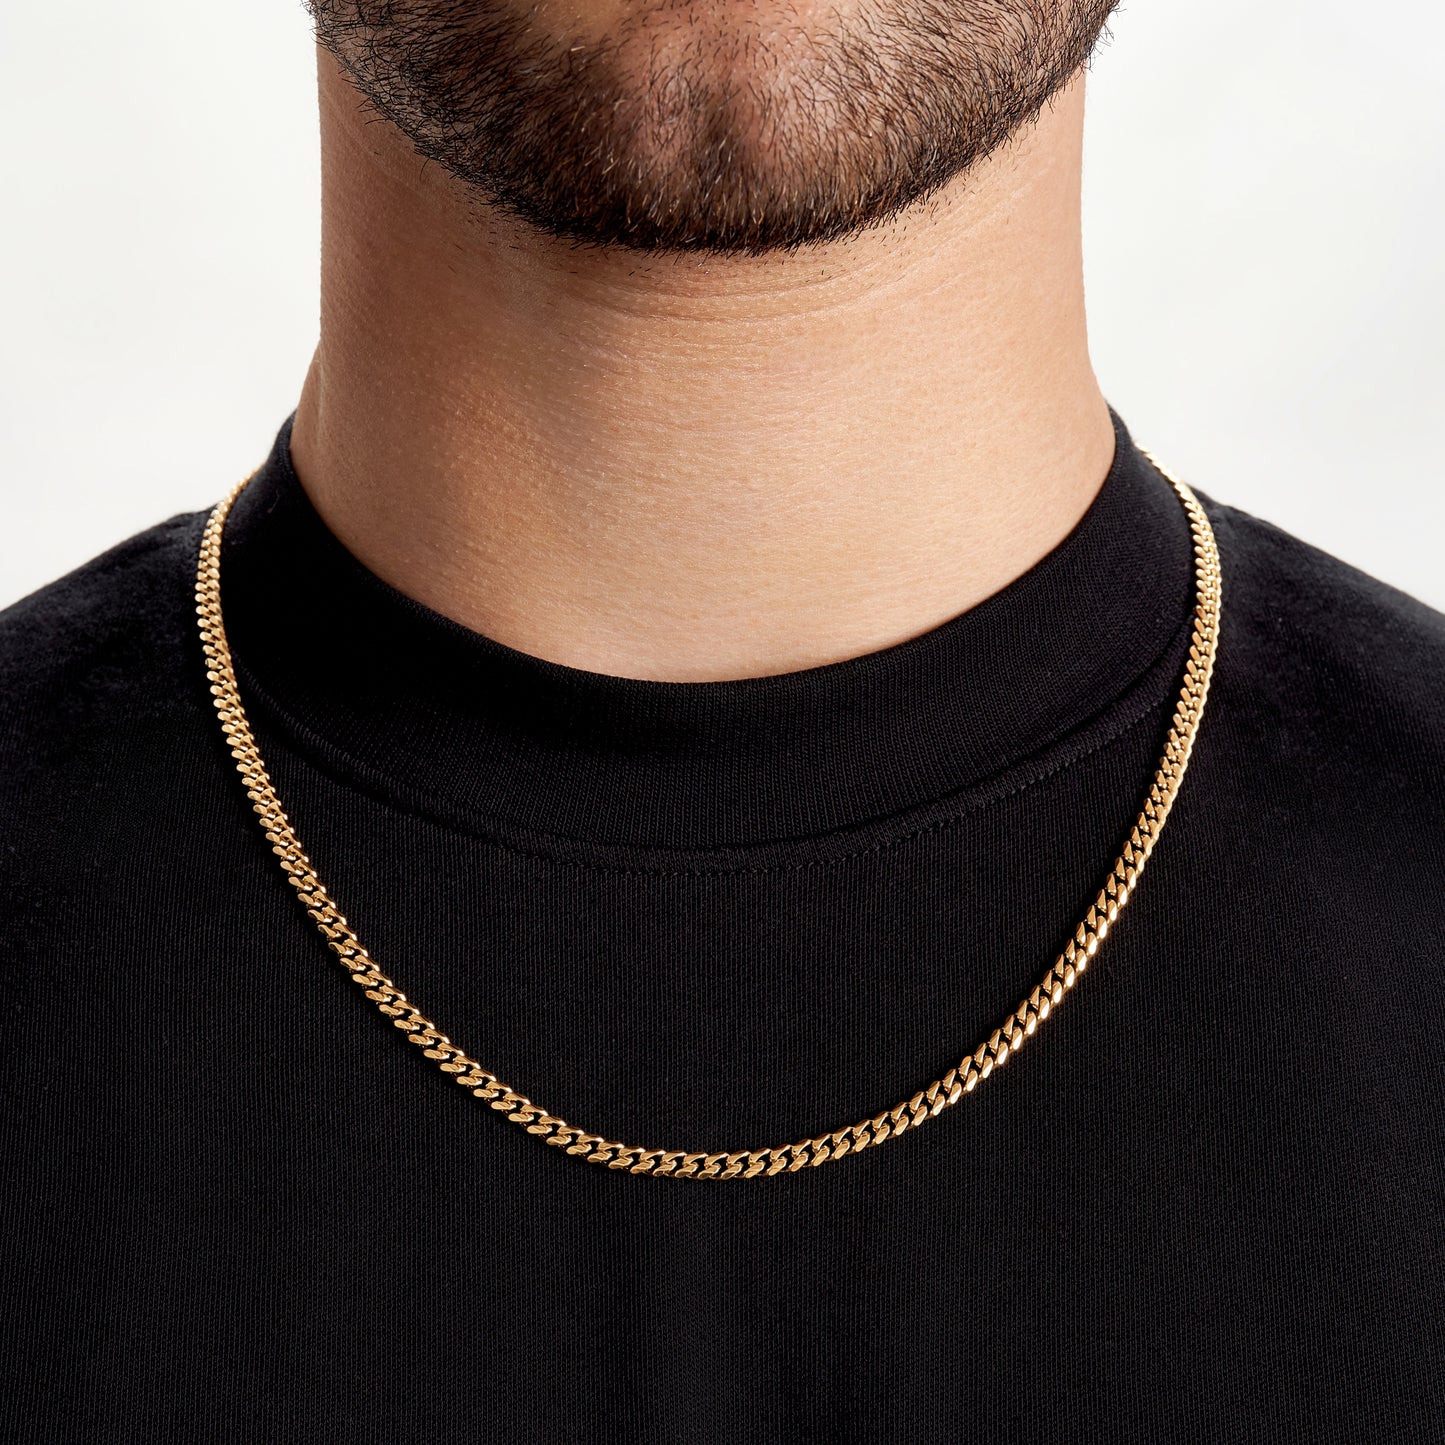 plain gold chain for male